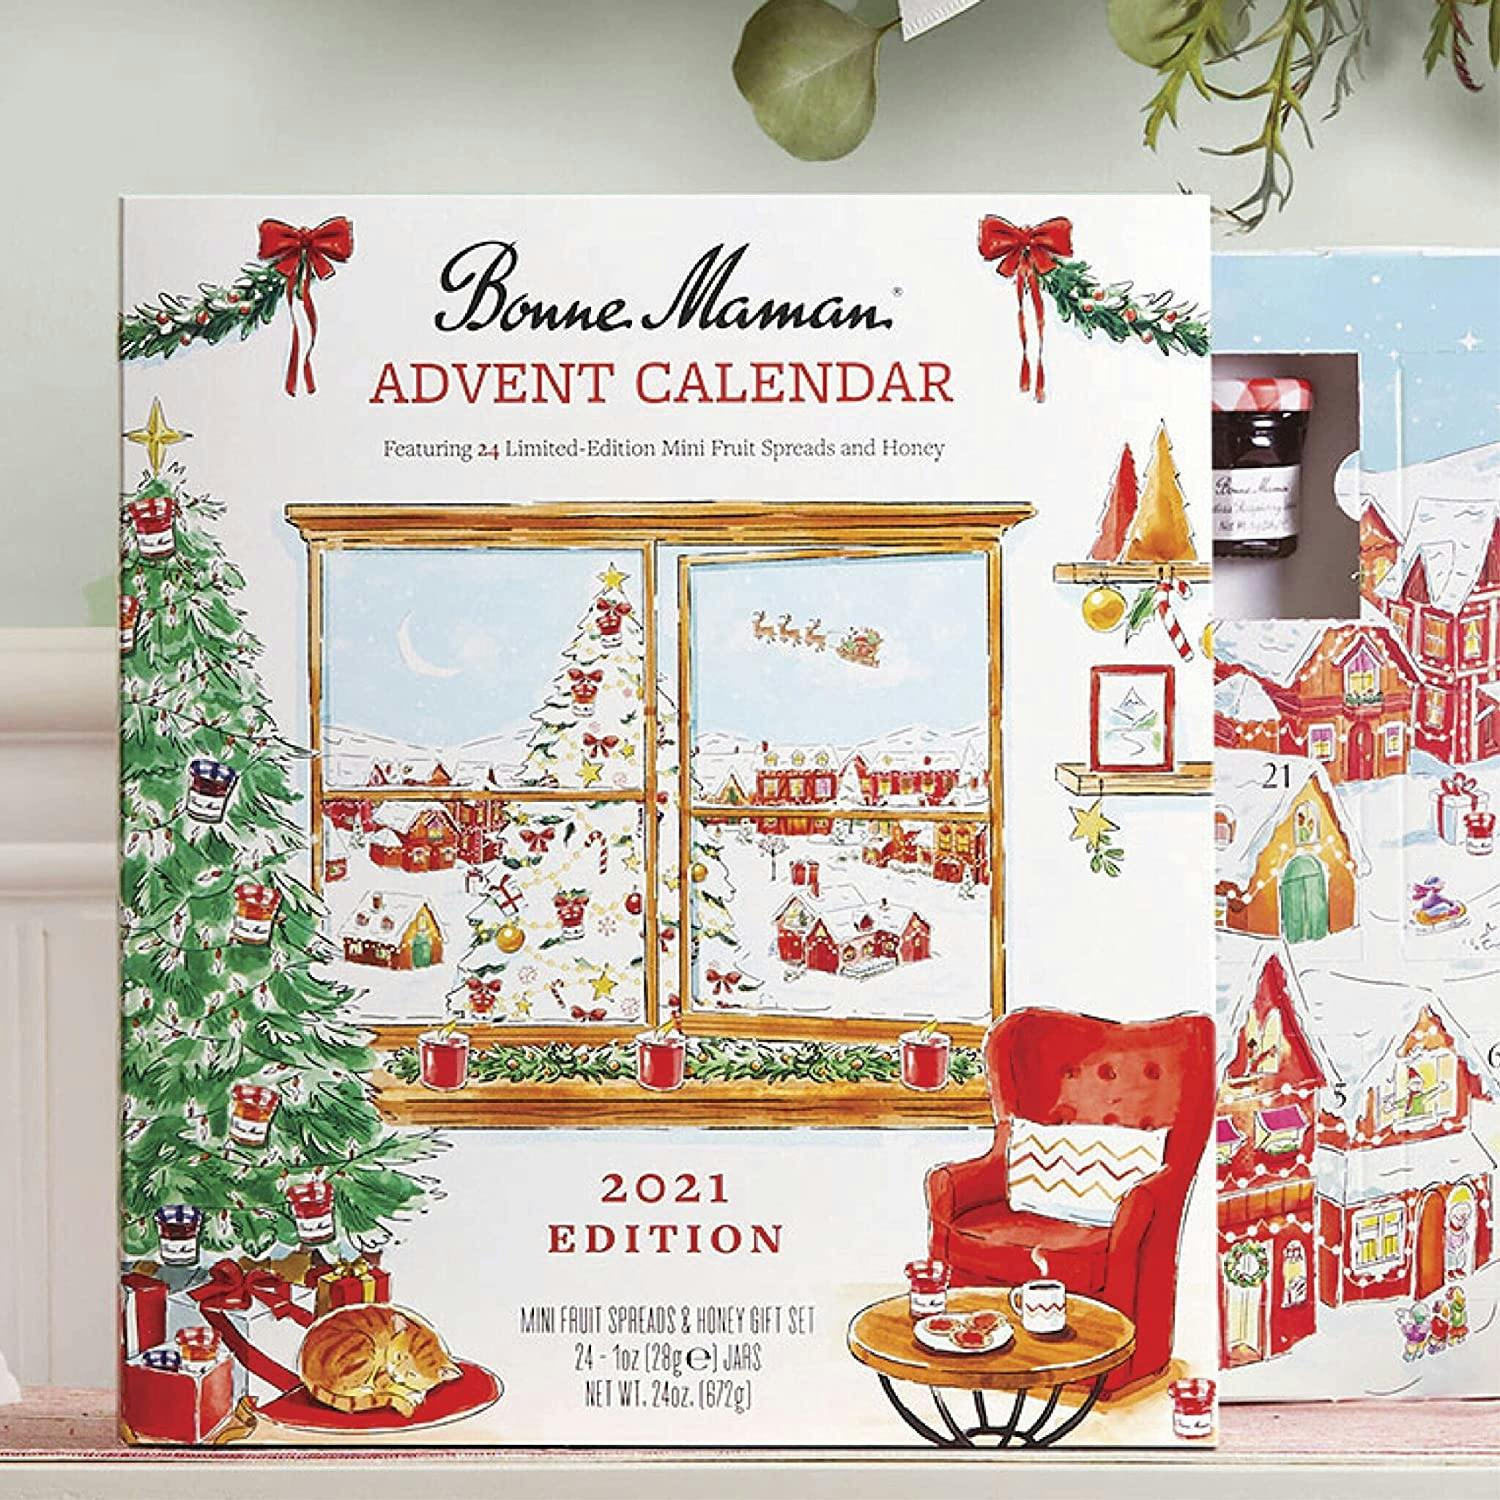 Order Your Bonne Maman 2021 Advent Calendar on Amazon Before It Sells